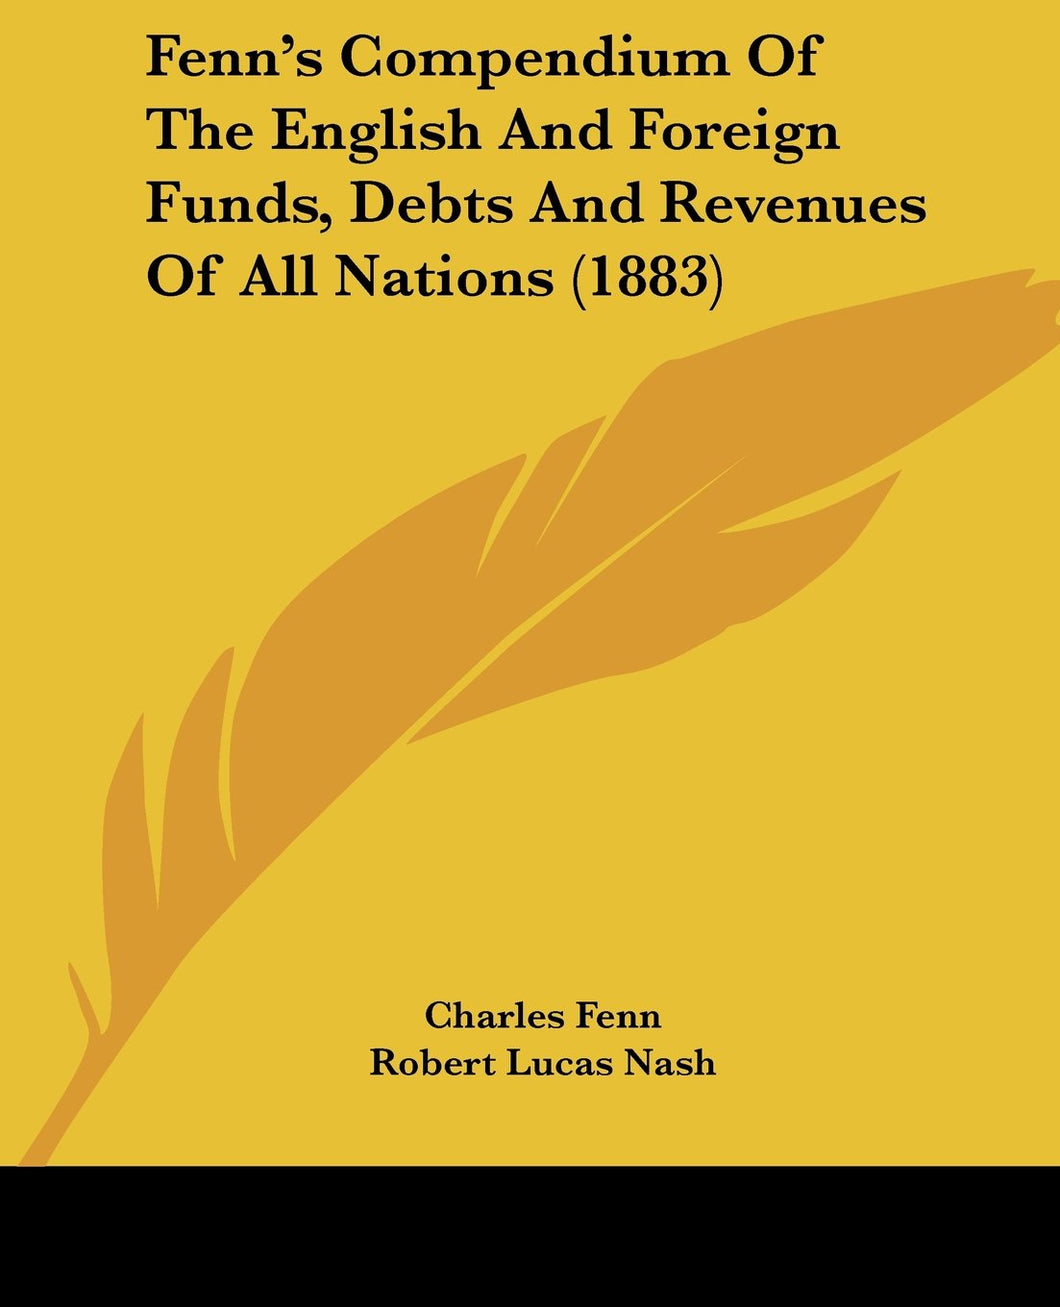 Fenn's Compendium of the English and Foreign Funds, Debts and Revenues of All Nations (1883)